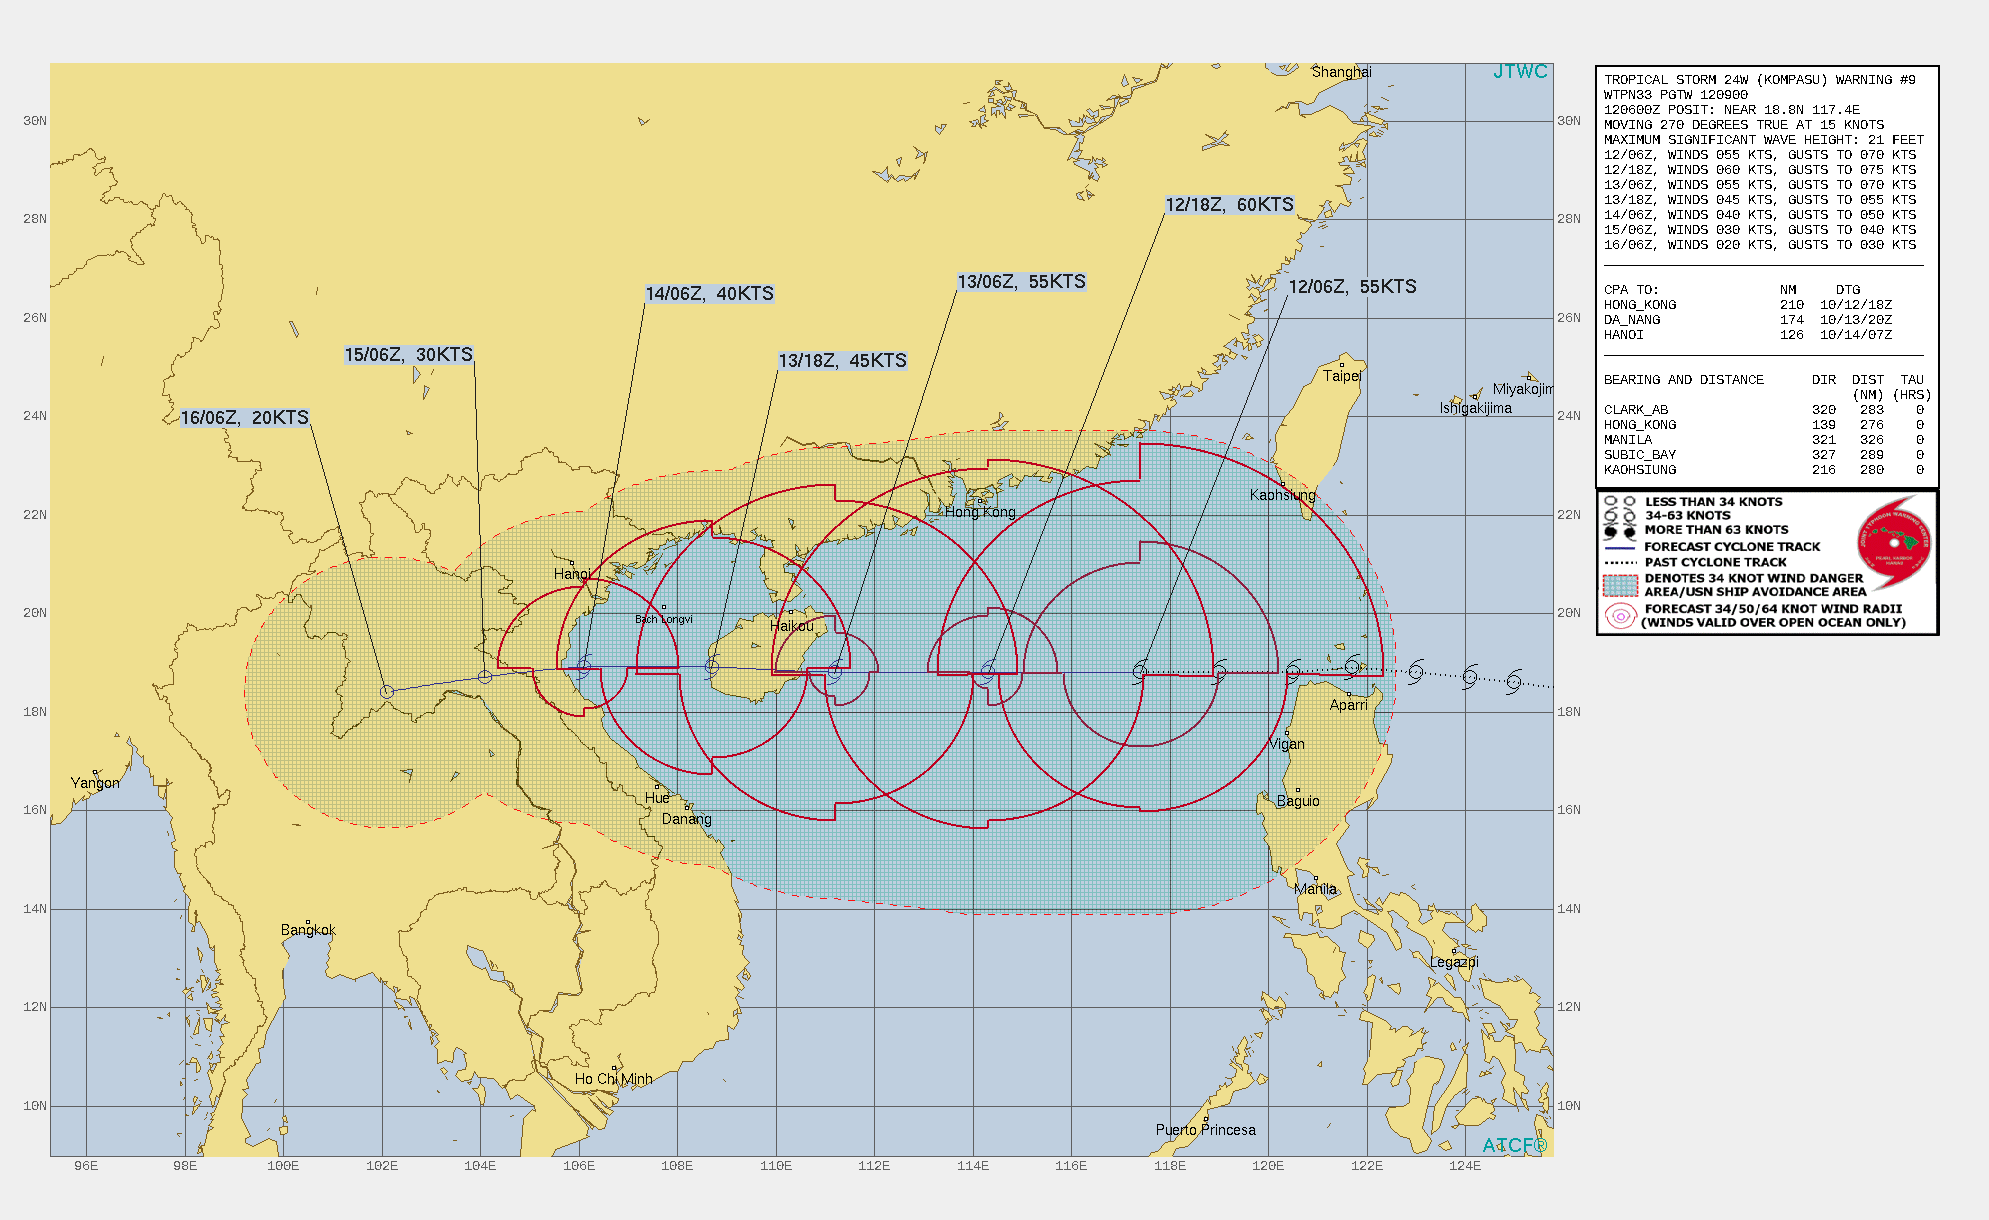 FORECAST REASONING.  SIGNIFICANT FORECAST CHANGES: THERE ARE NO SIGNIFICANT CHANGES TO THE FORECAST FROM THE PREVIOUS WARNING.  FORECAST DISCUSSION: TROPICAL STORM (TS) 24W IS FORECAST TO TRACK WESTWARD THROUGH THE FORECAST PERIOD UNDER THE STEERING INFLUENCE OF THE SUBTROPICAL RIDGE(STR). TS 24W WILL STRENGTHEN TO A PEAK OF 60 KNOTS BY 12H THEN GRADUALLY WEAKEN AS VWS INCREASES. AS THE SYSTEM TRACKS OVER HAINAN AFTER 24, IT WILL WEAKEN SIGNIFICANTLY WITH MORE RAPID WEAKENING EXPECTED AS THE SYSTEM MAKES LANDFALL OVER VIETNAM AFTER 48H. DISSIPAT